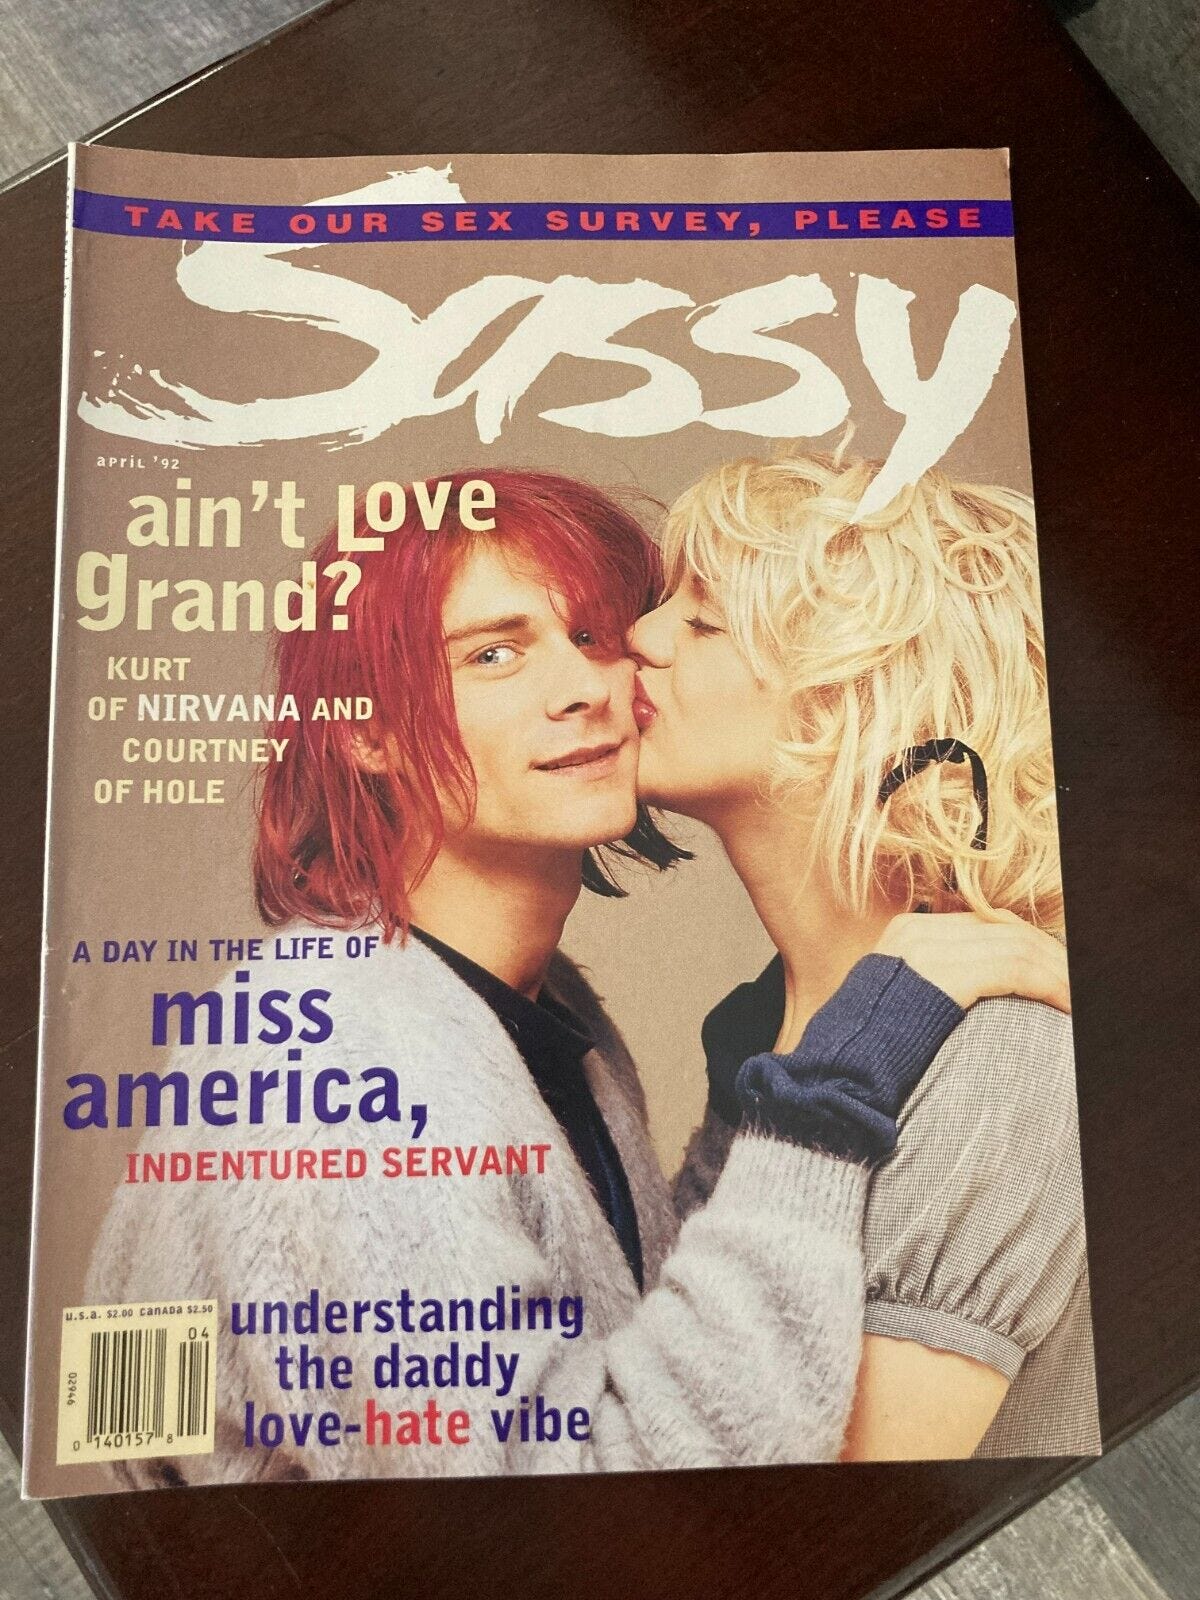 a copy of "sassy" magazine where kurt cobain, with messy dyed-red hair and a fuzzy cardigan, is kissed on the cheek by his wife, a blissed-out woman with tangled blonde hair and bright red lipstick